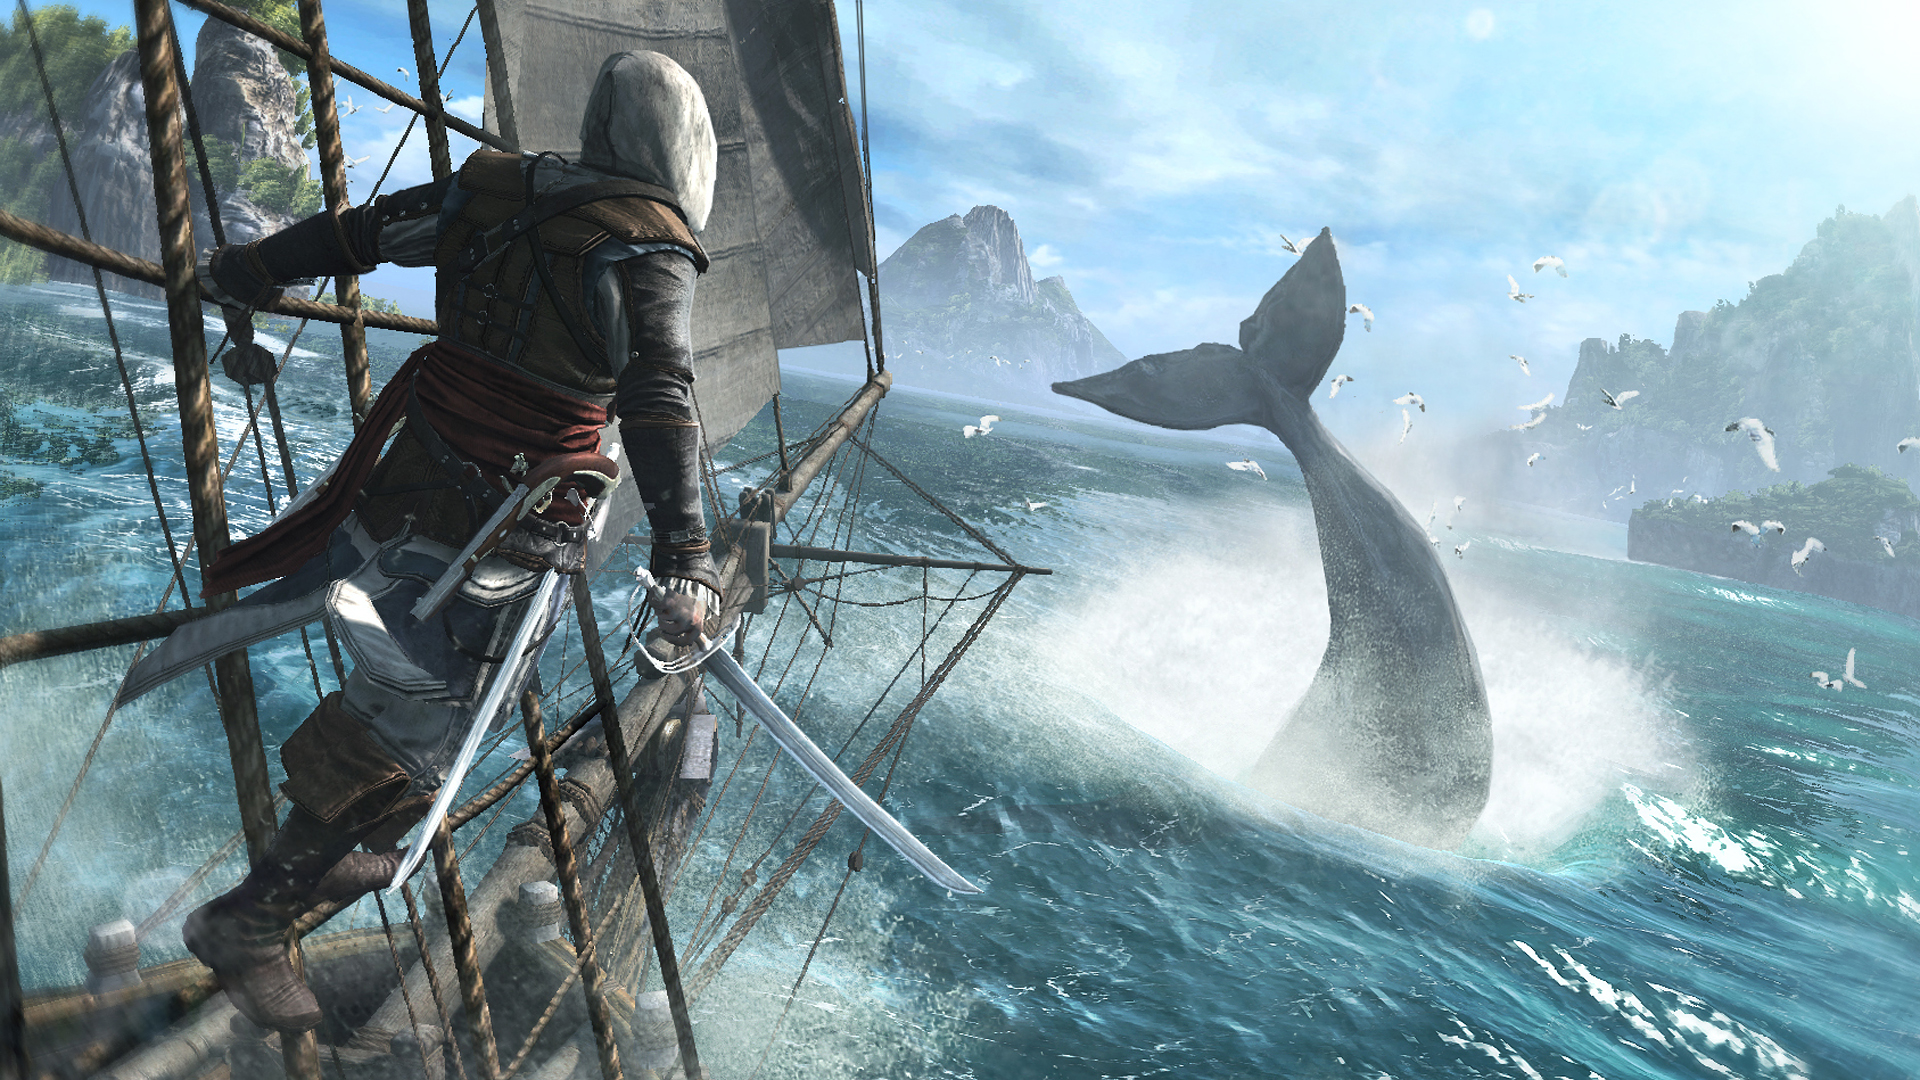 Assassin's Creed IV: Black Flag Backgrounds, Compatible - PC, Mobile, Gadgets| 1920x1080 px